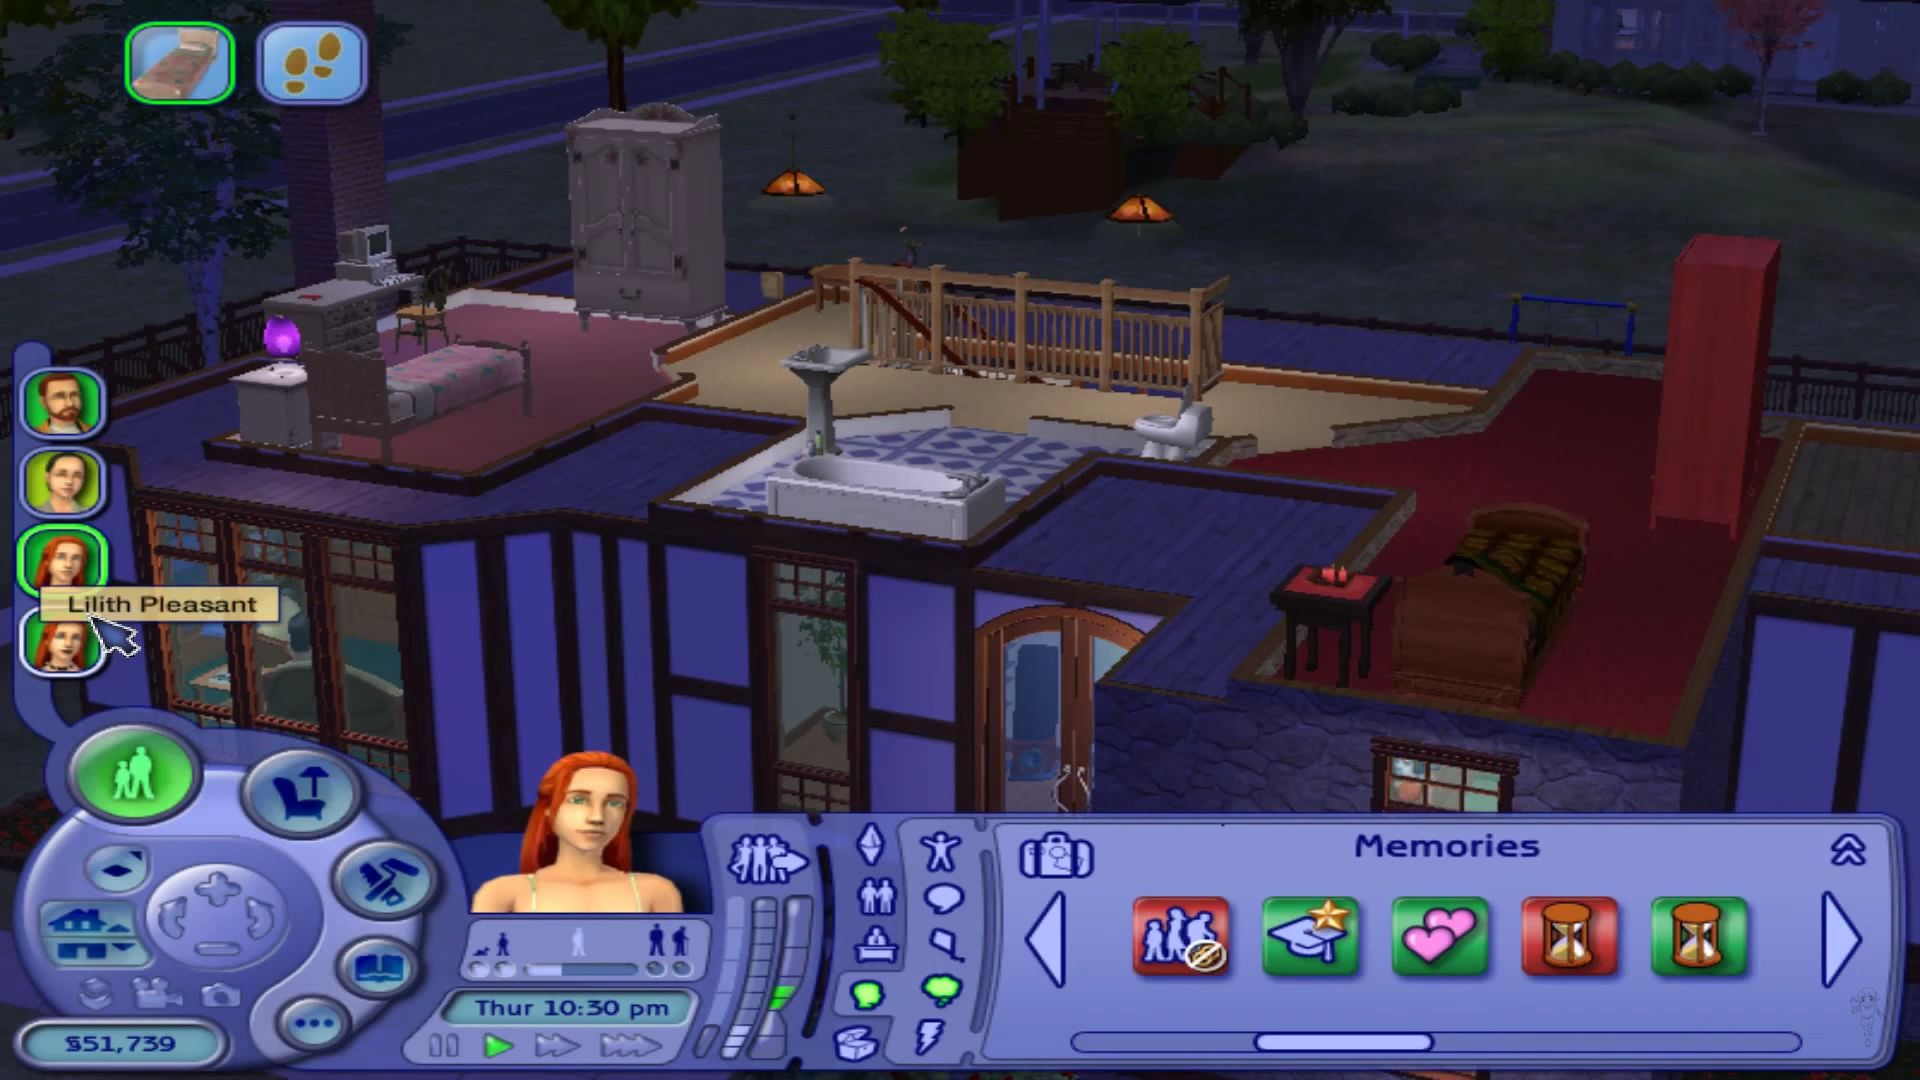 installing sims 2 expansion packs affects saves